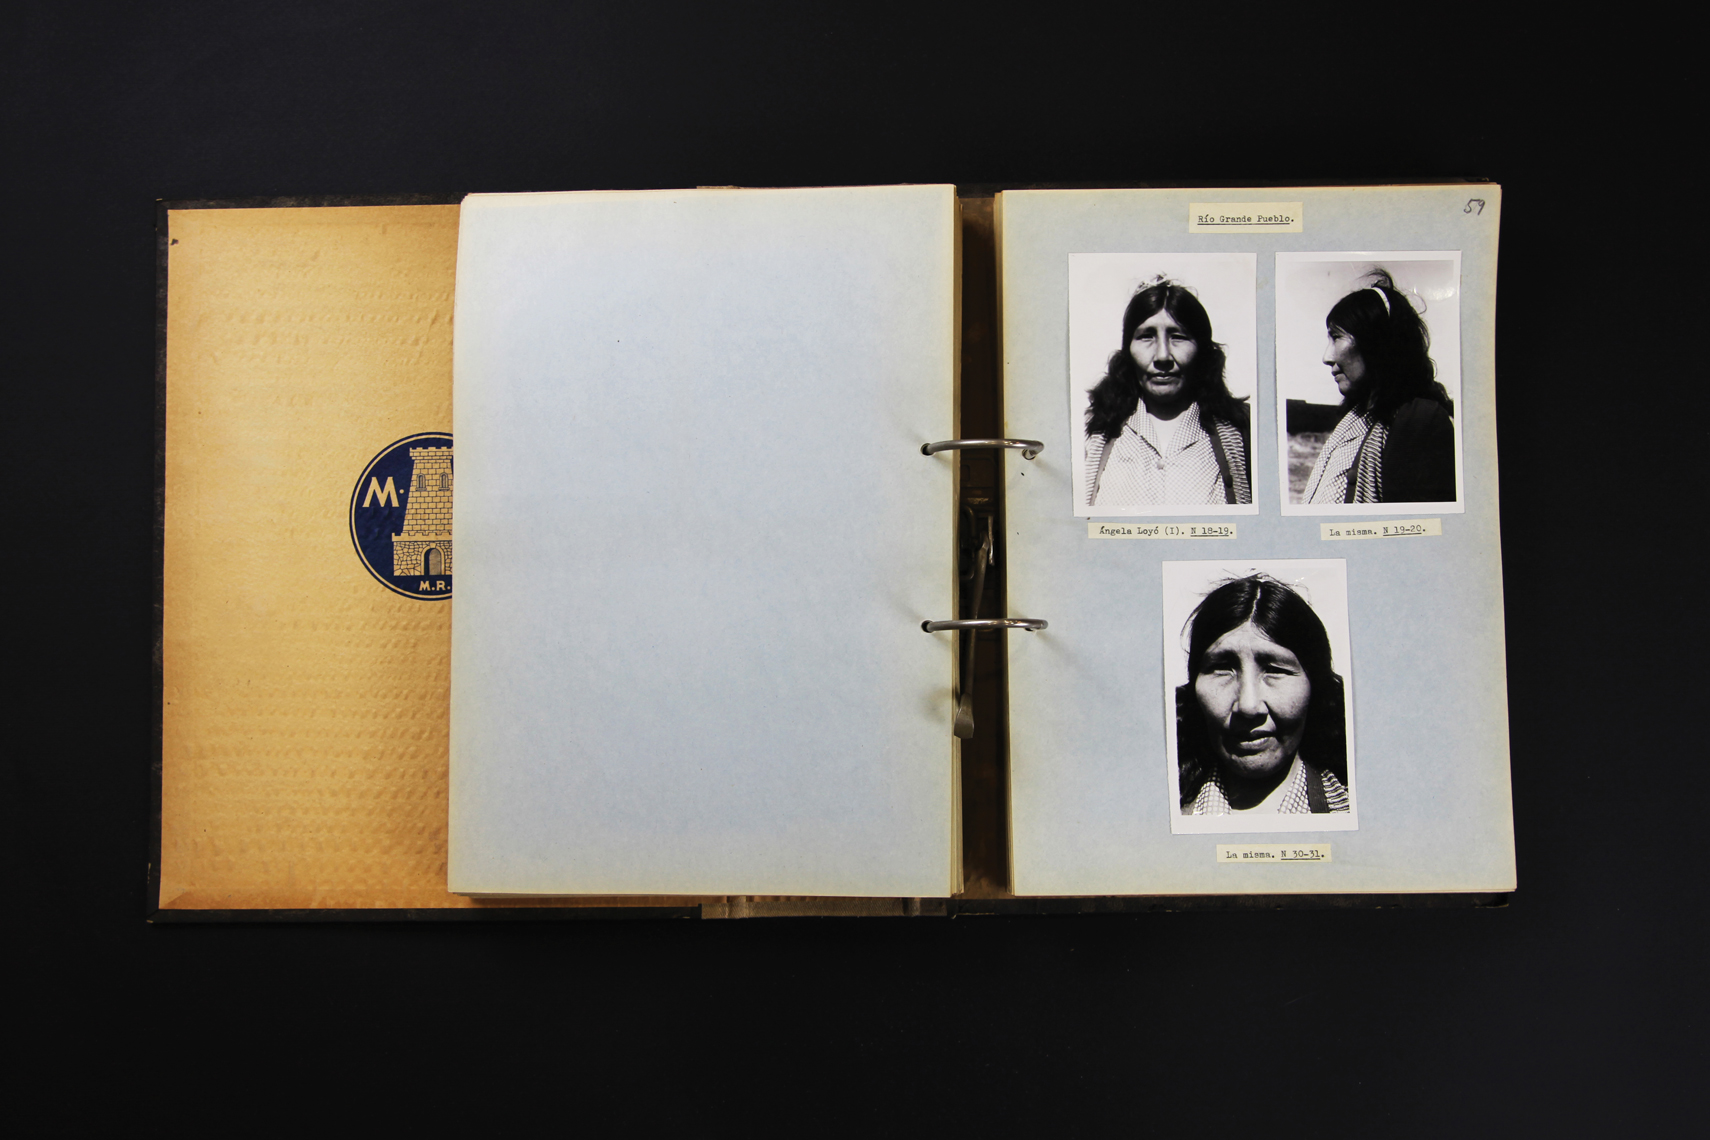 Open binder with right page showing three black and white photographs of a person.